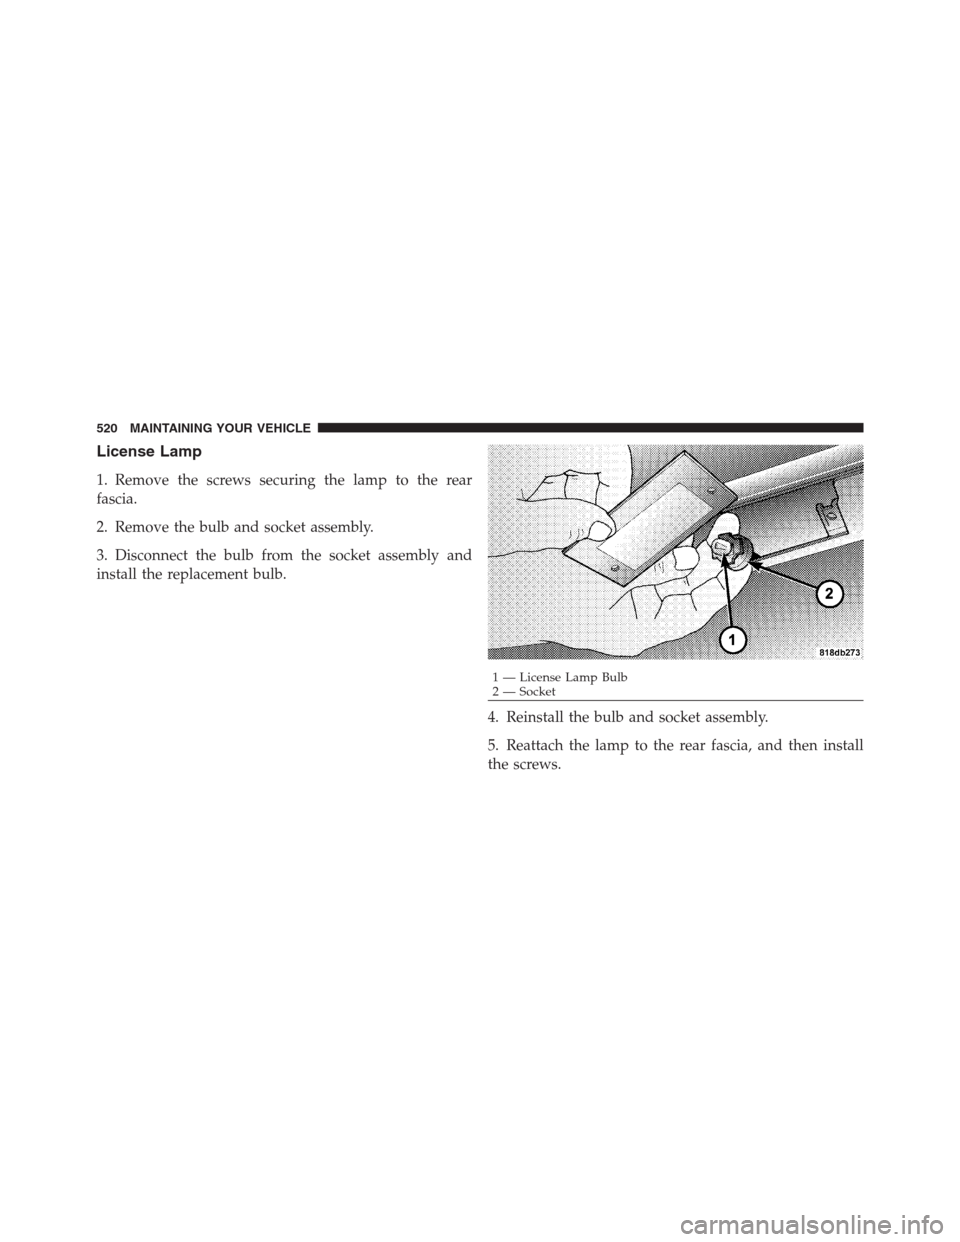 CHRYSLER 300 2012 2.G Owners Manual License Lamp
1. Remove the screws securing the lamp to the rear
fascia.
2. Remove the bulb and socket assembly.
3. Disconnect the bulb from the socket assembly and
install the replacement bulb.
4. Rei